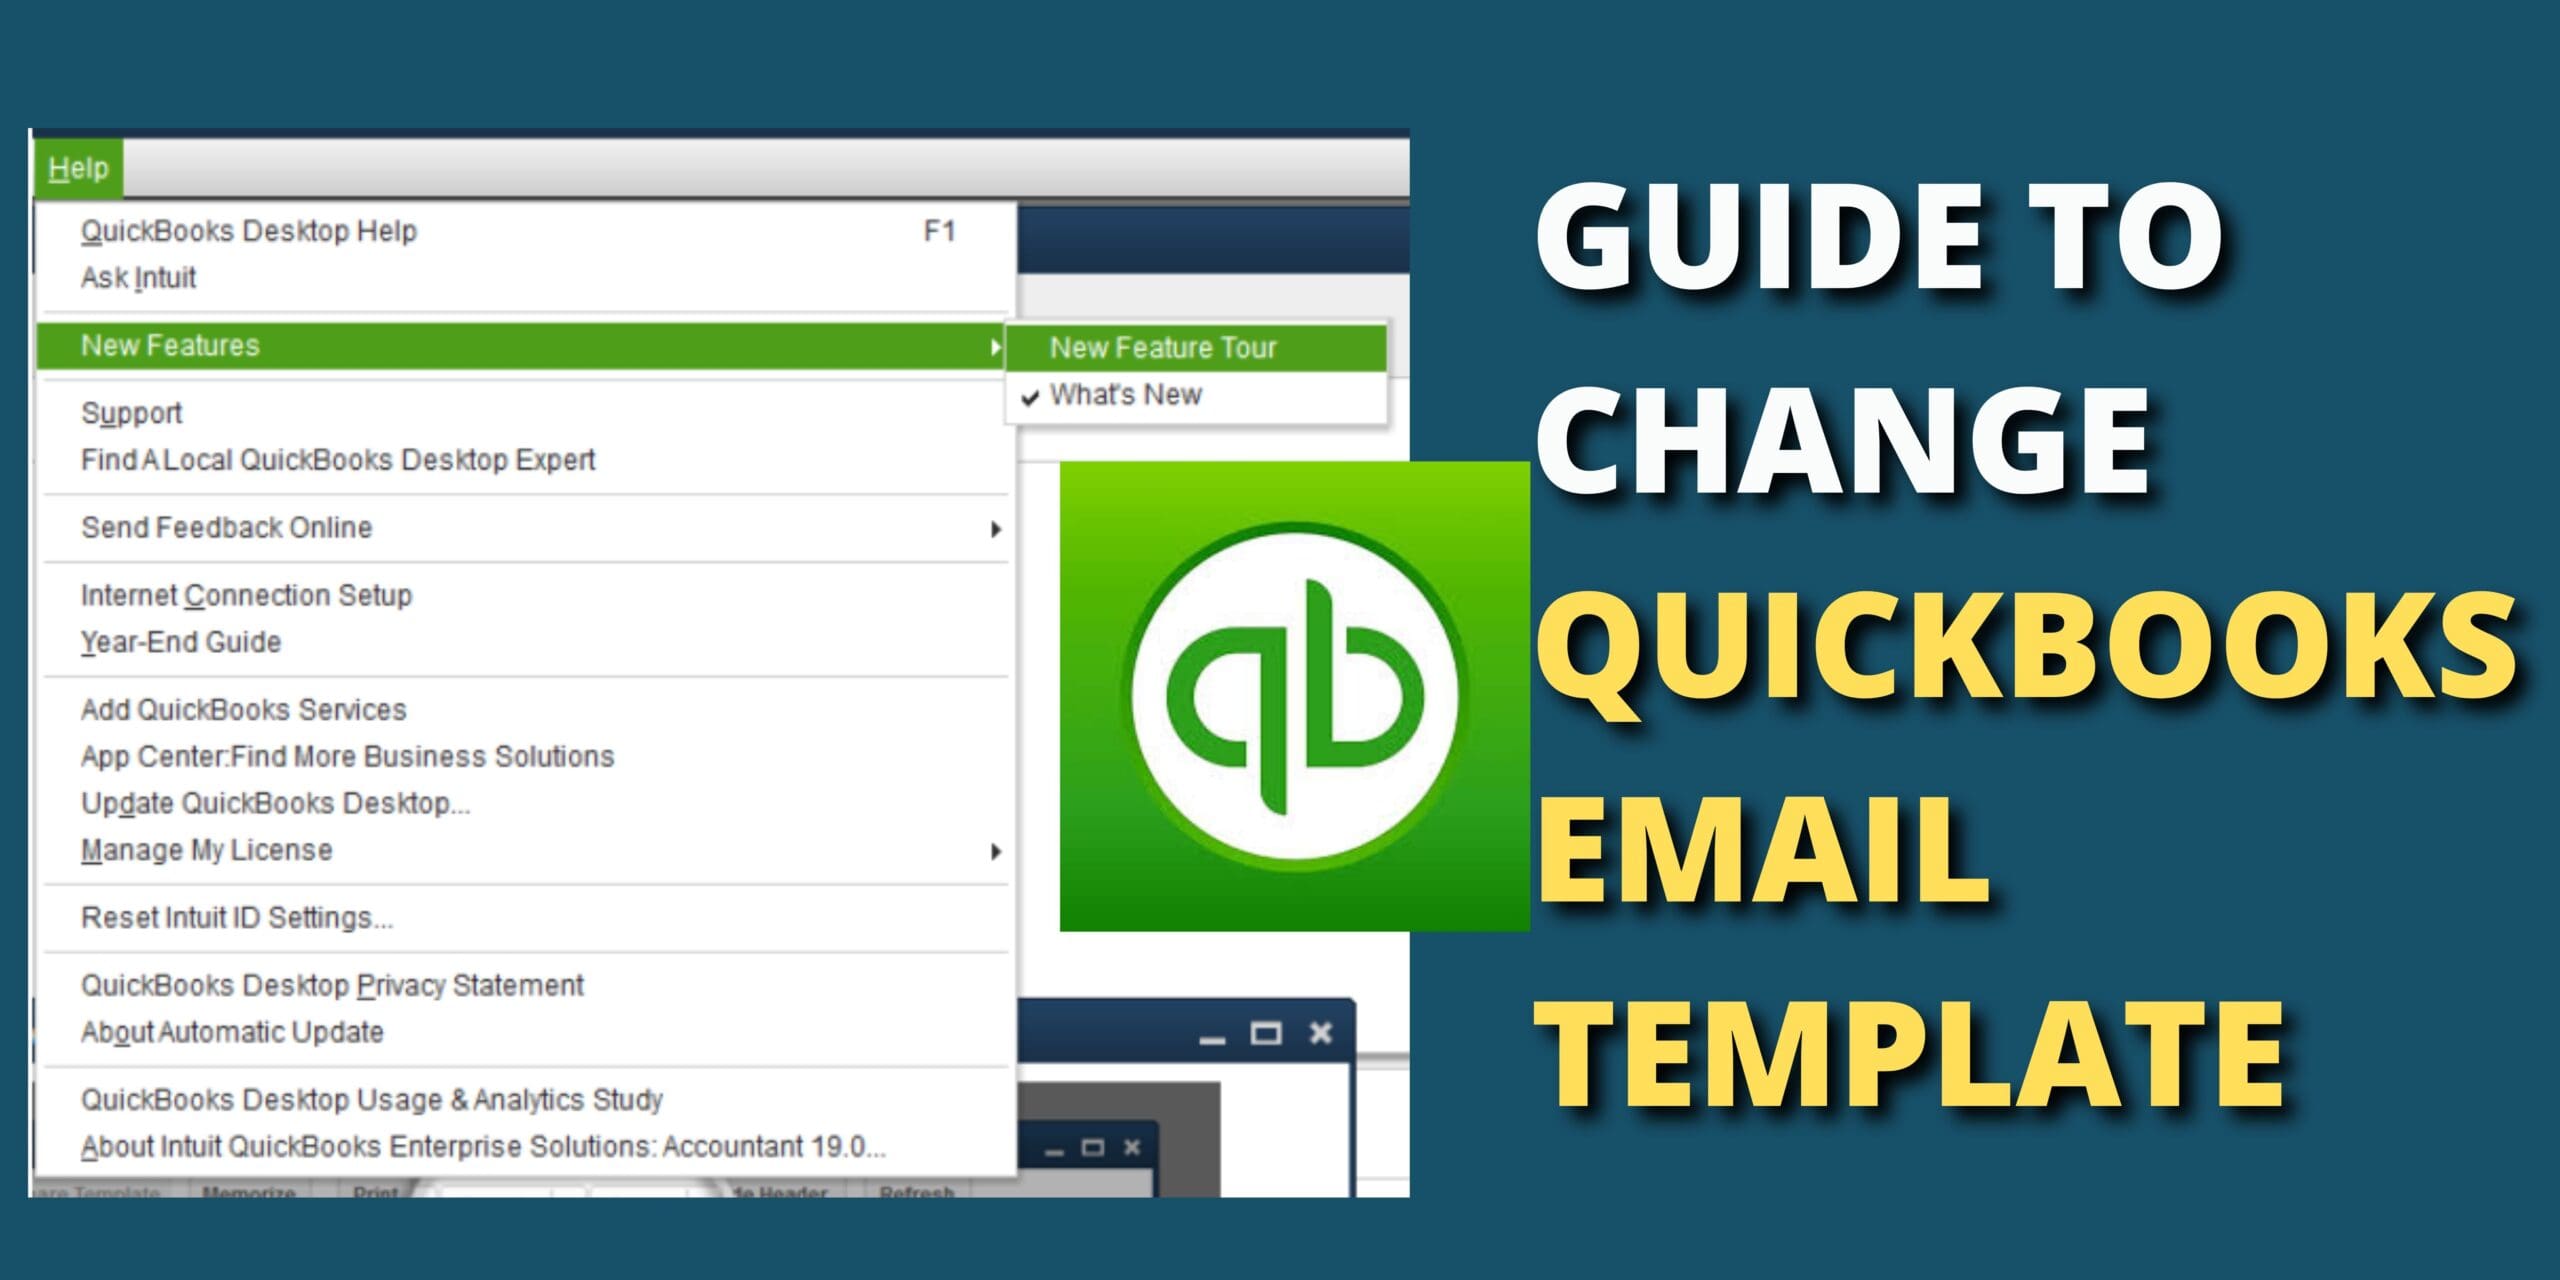 Guide To Change QuickBooks Email Template